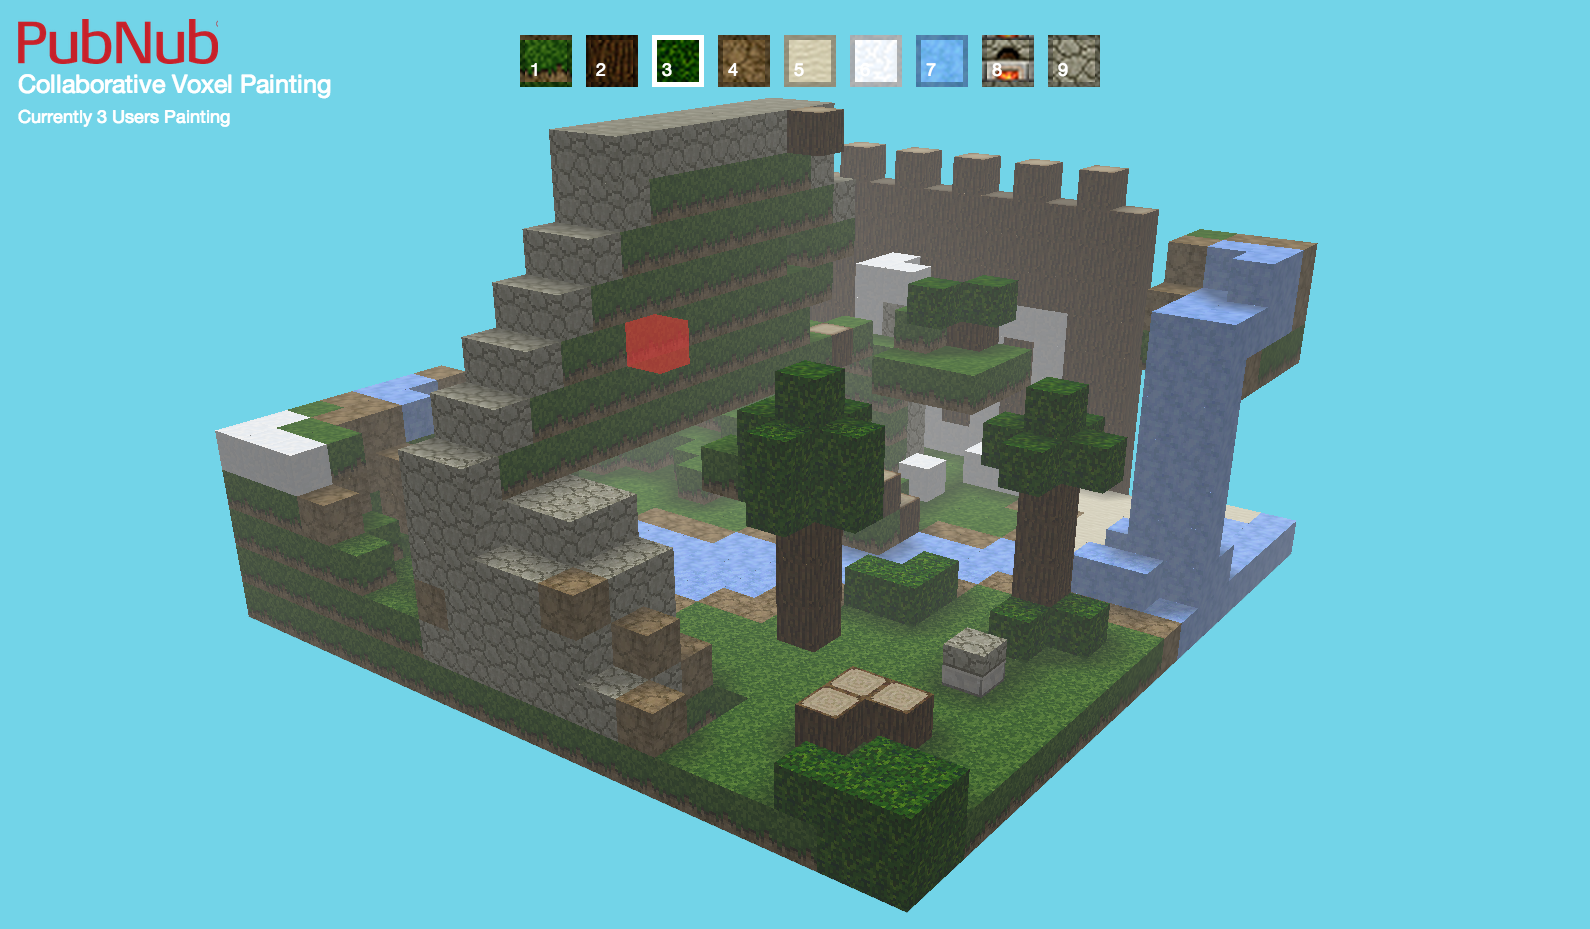 Collaborative Voxel Painting by 3 users